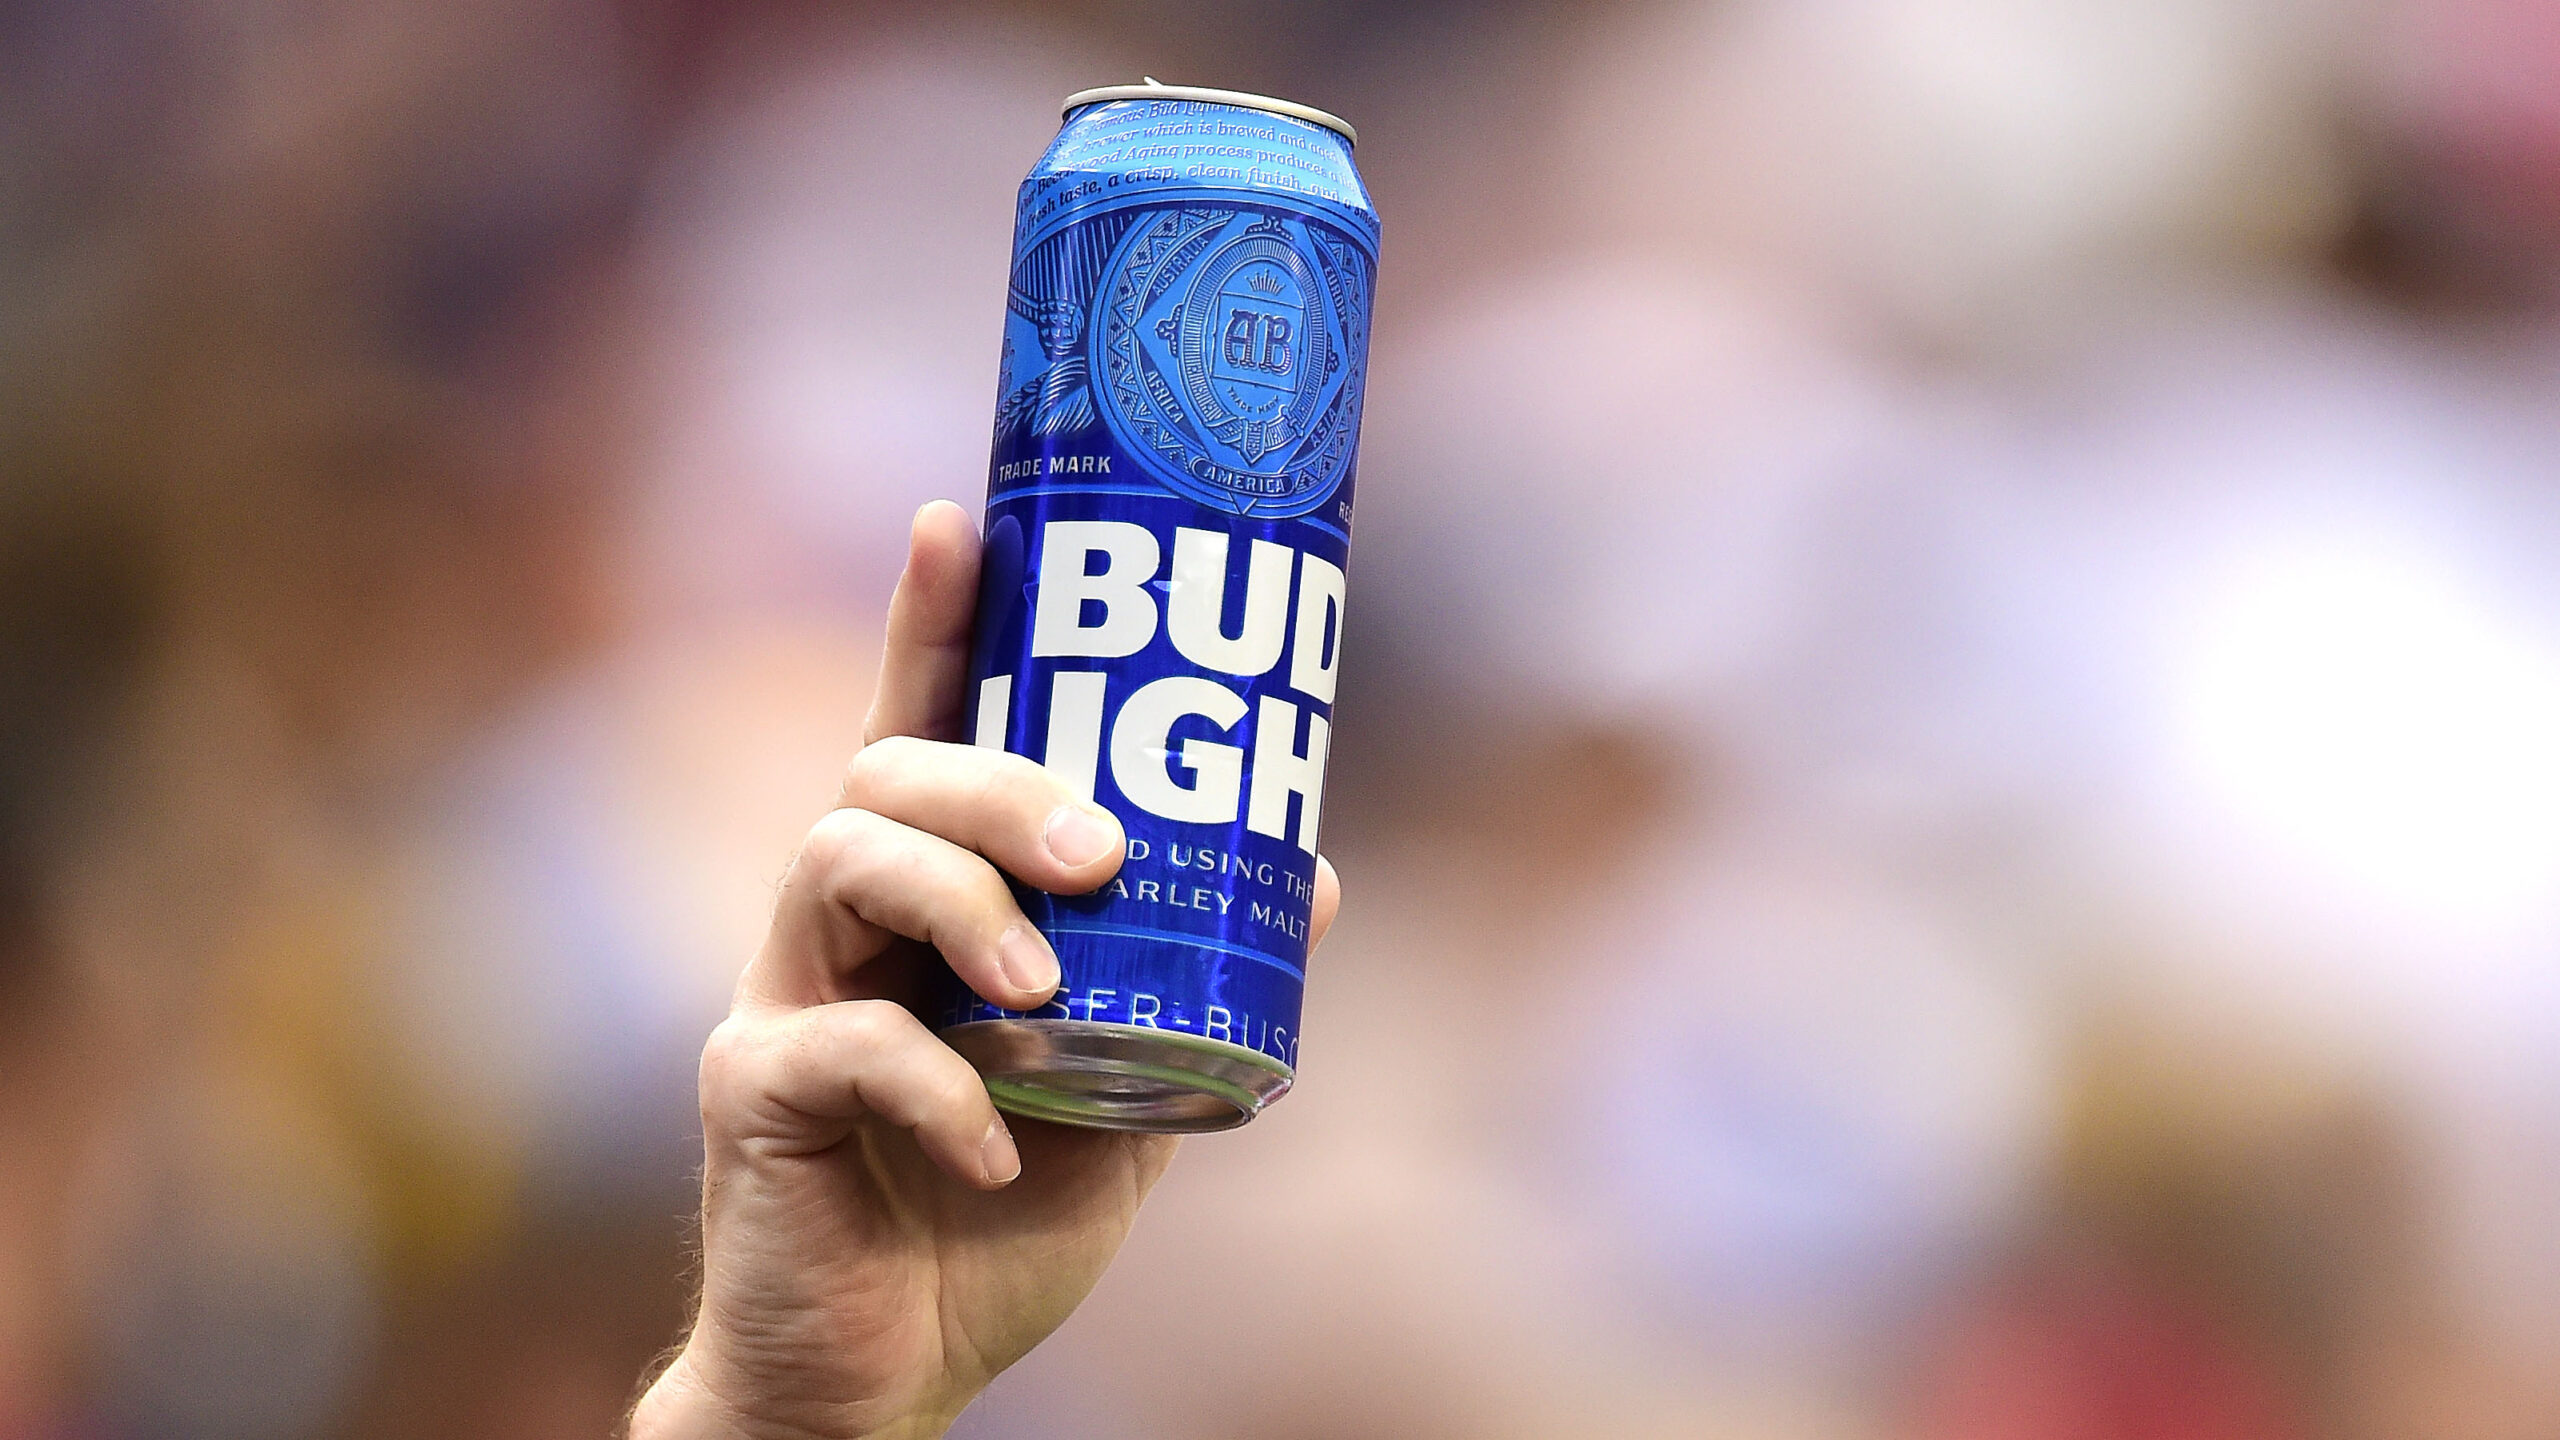 New Details Emerge Over ‘Mistake’ That Led To Bud Light’s Paid Marketing Engagement With Trans Influencer